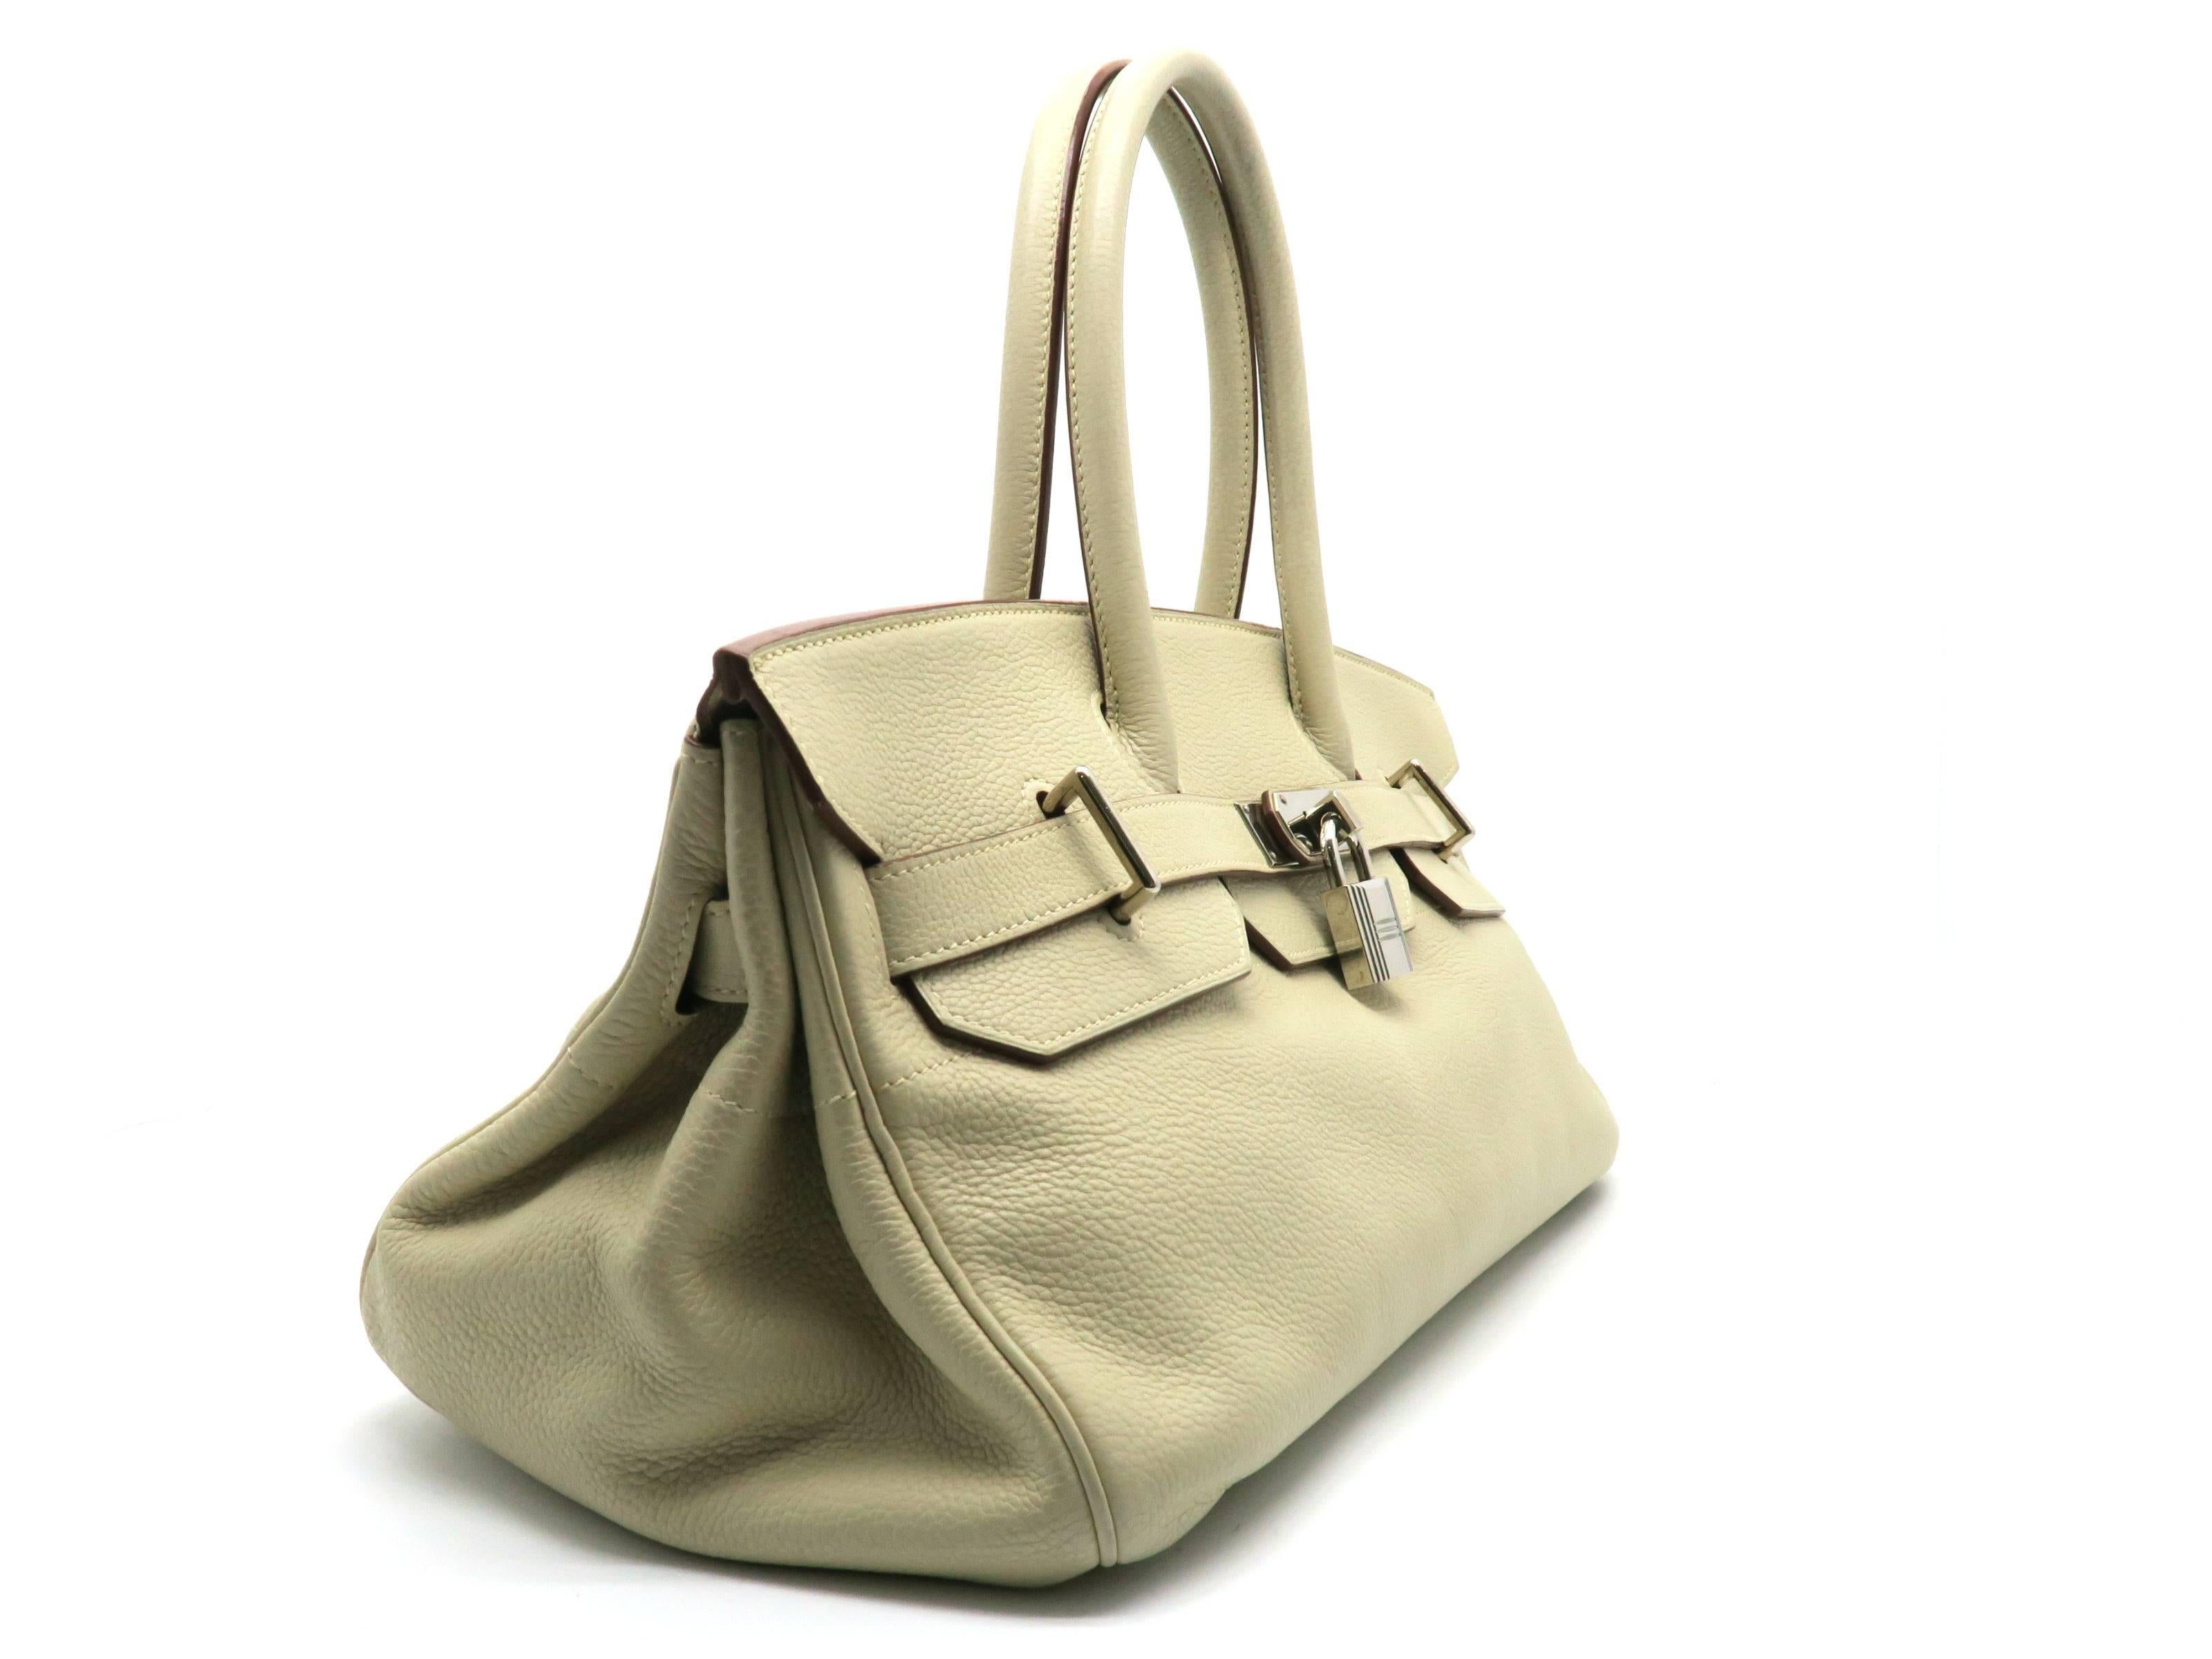 Color: Beige / Jaune Poussin (designer color) 

Material: Clemence Leather 

Condition: Rank A 
Overall: Good, few minor defects. 
Surface: Good 
Corners: Minor Scratches & Stains
Edges: Minor Stains
Handles/Straps: Minor Scratches & Stains